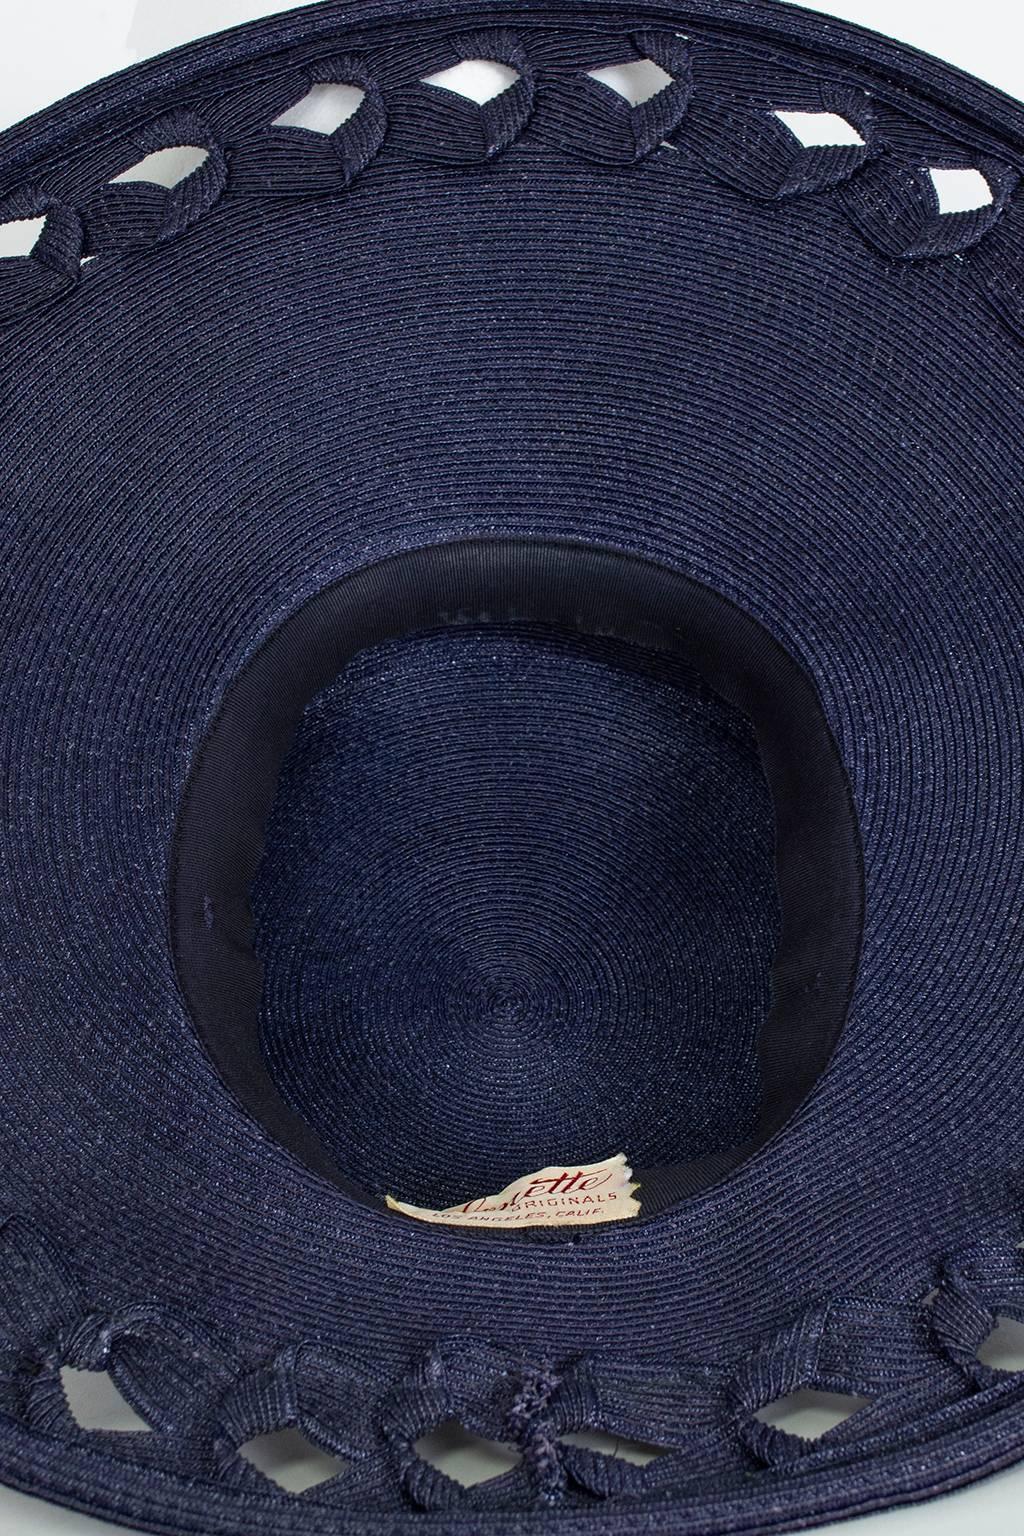 straw hat with hole on top